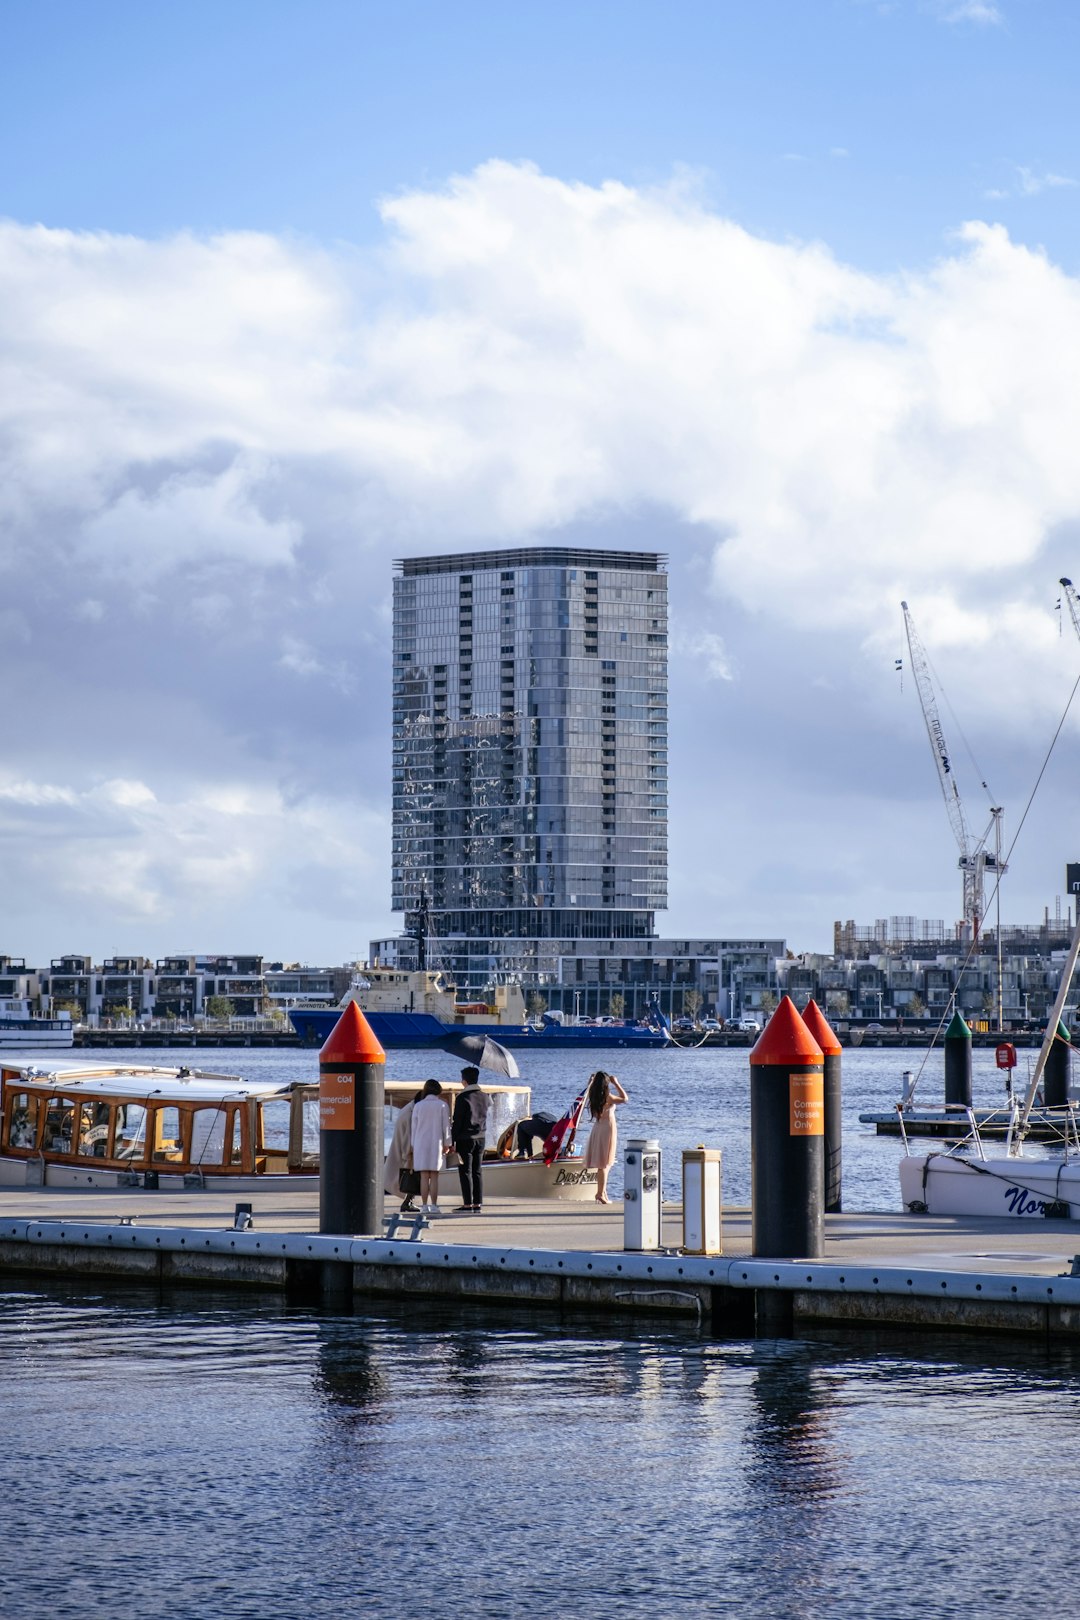 Travel Tips and Stories of Docklands in Australia